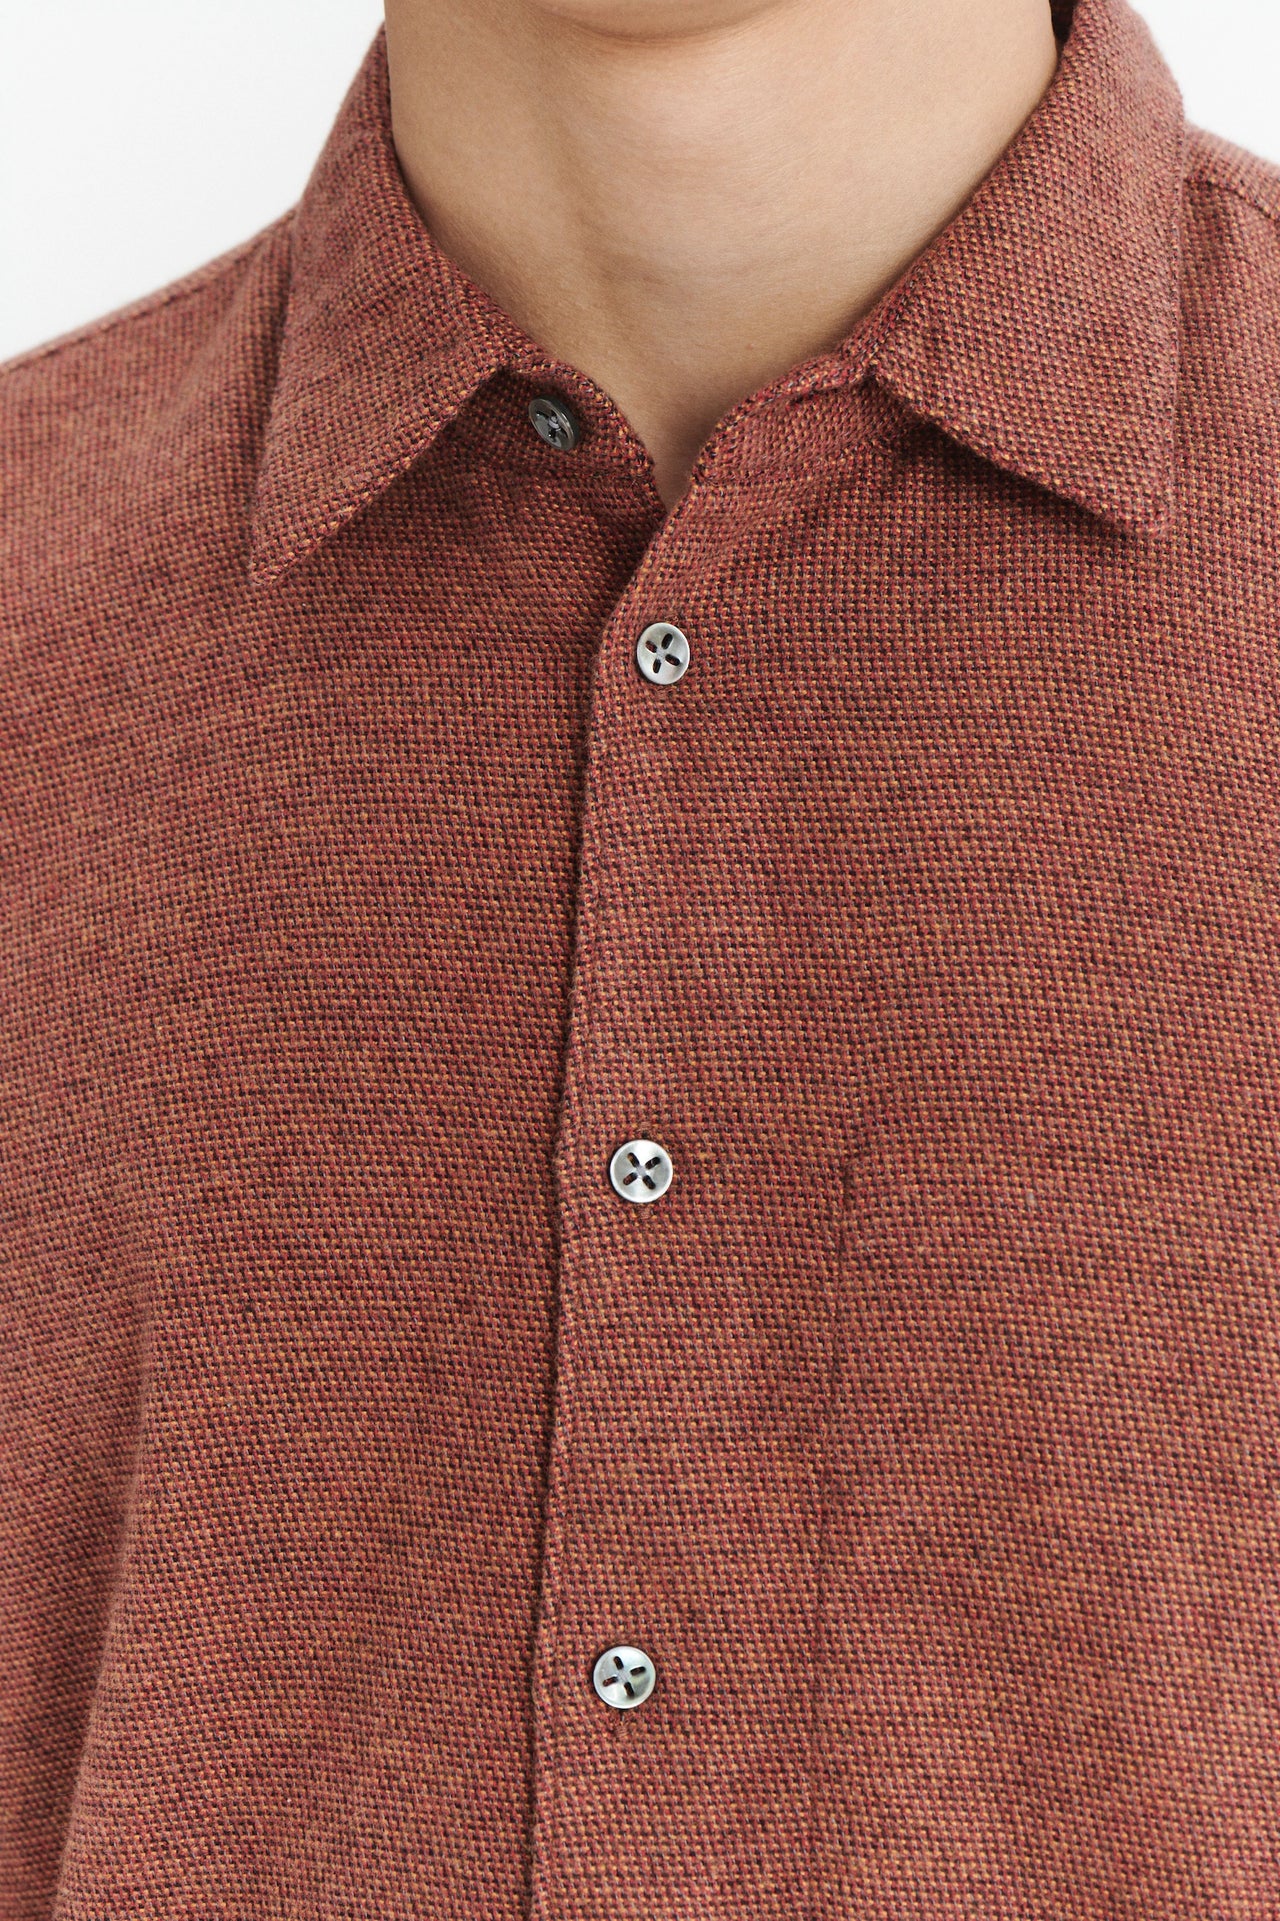 Feel Good Shirt in an Iron Red Portuguese Cotton Flannel